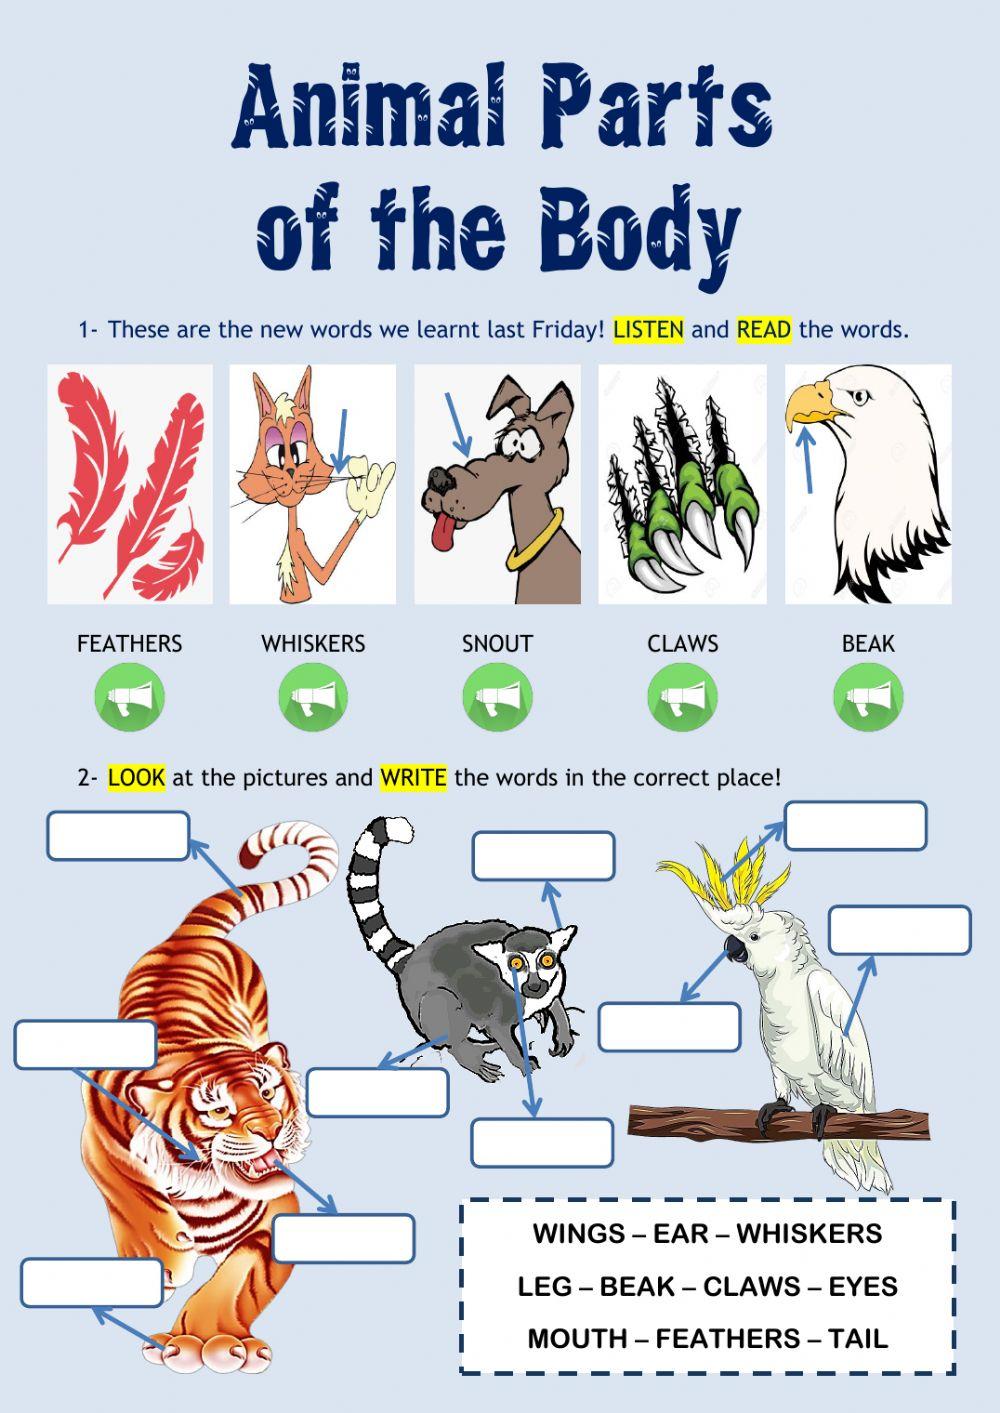 Animal Parts of the Body II